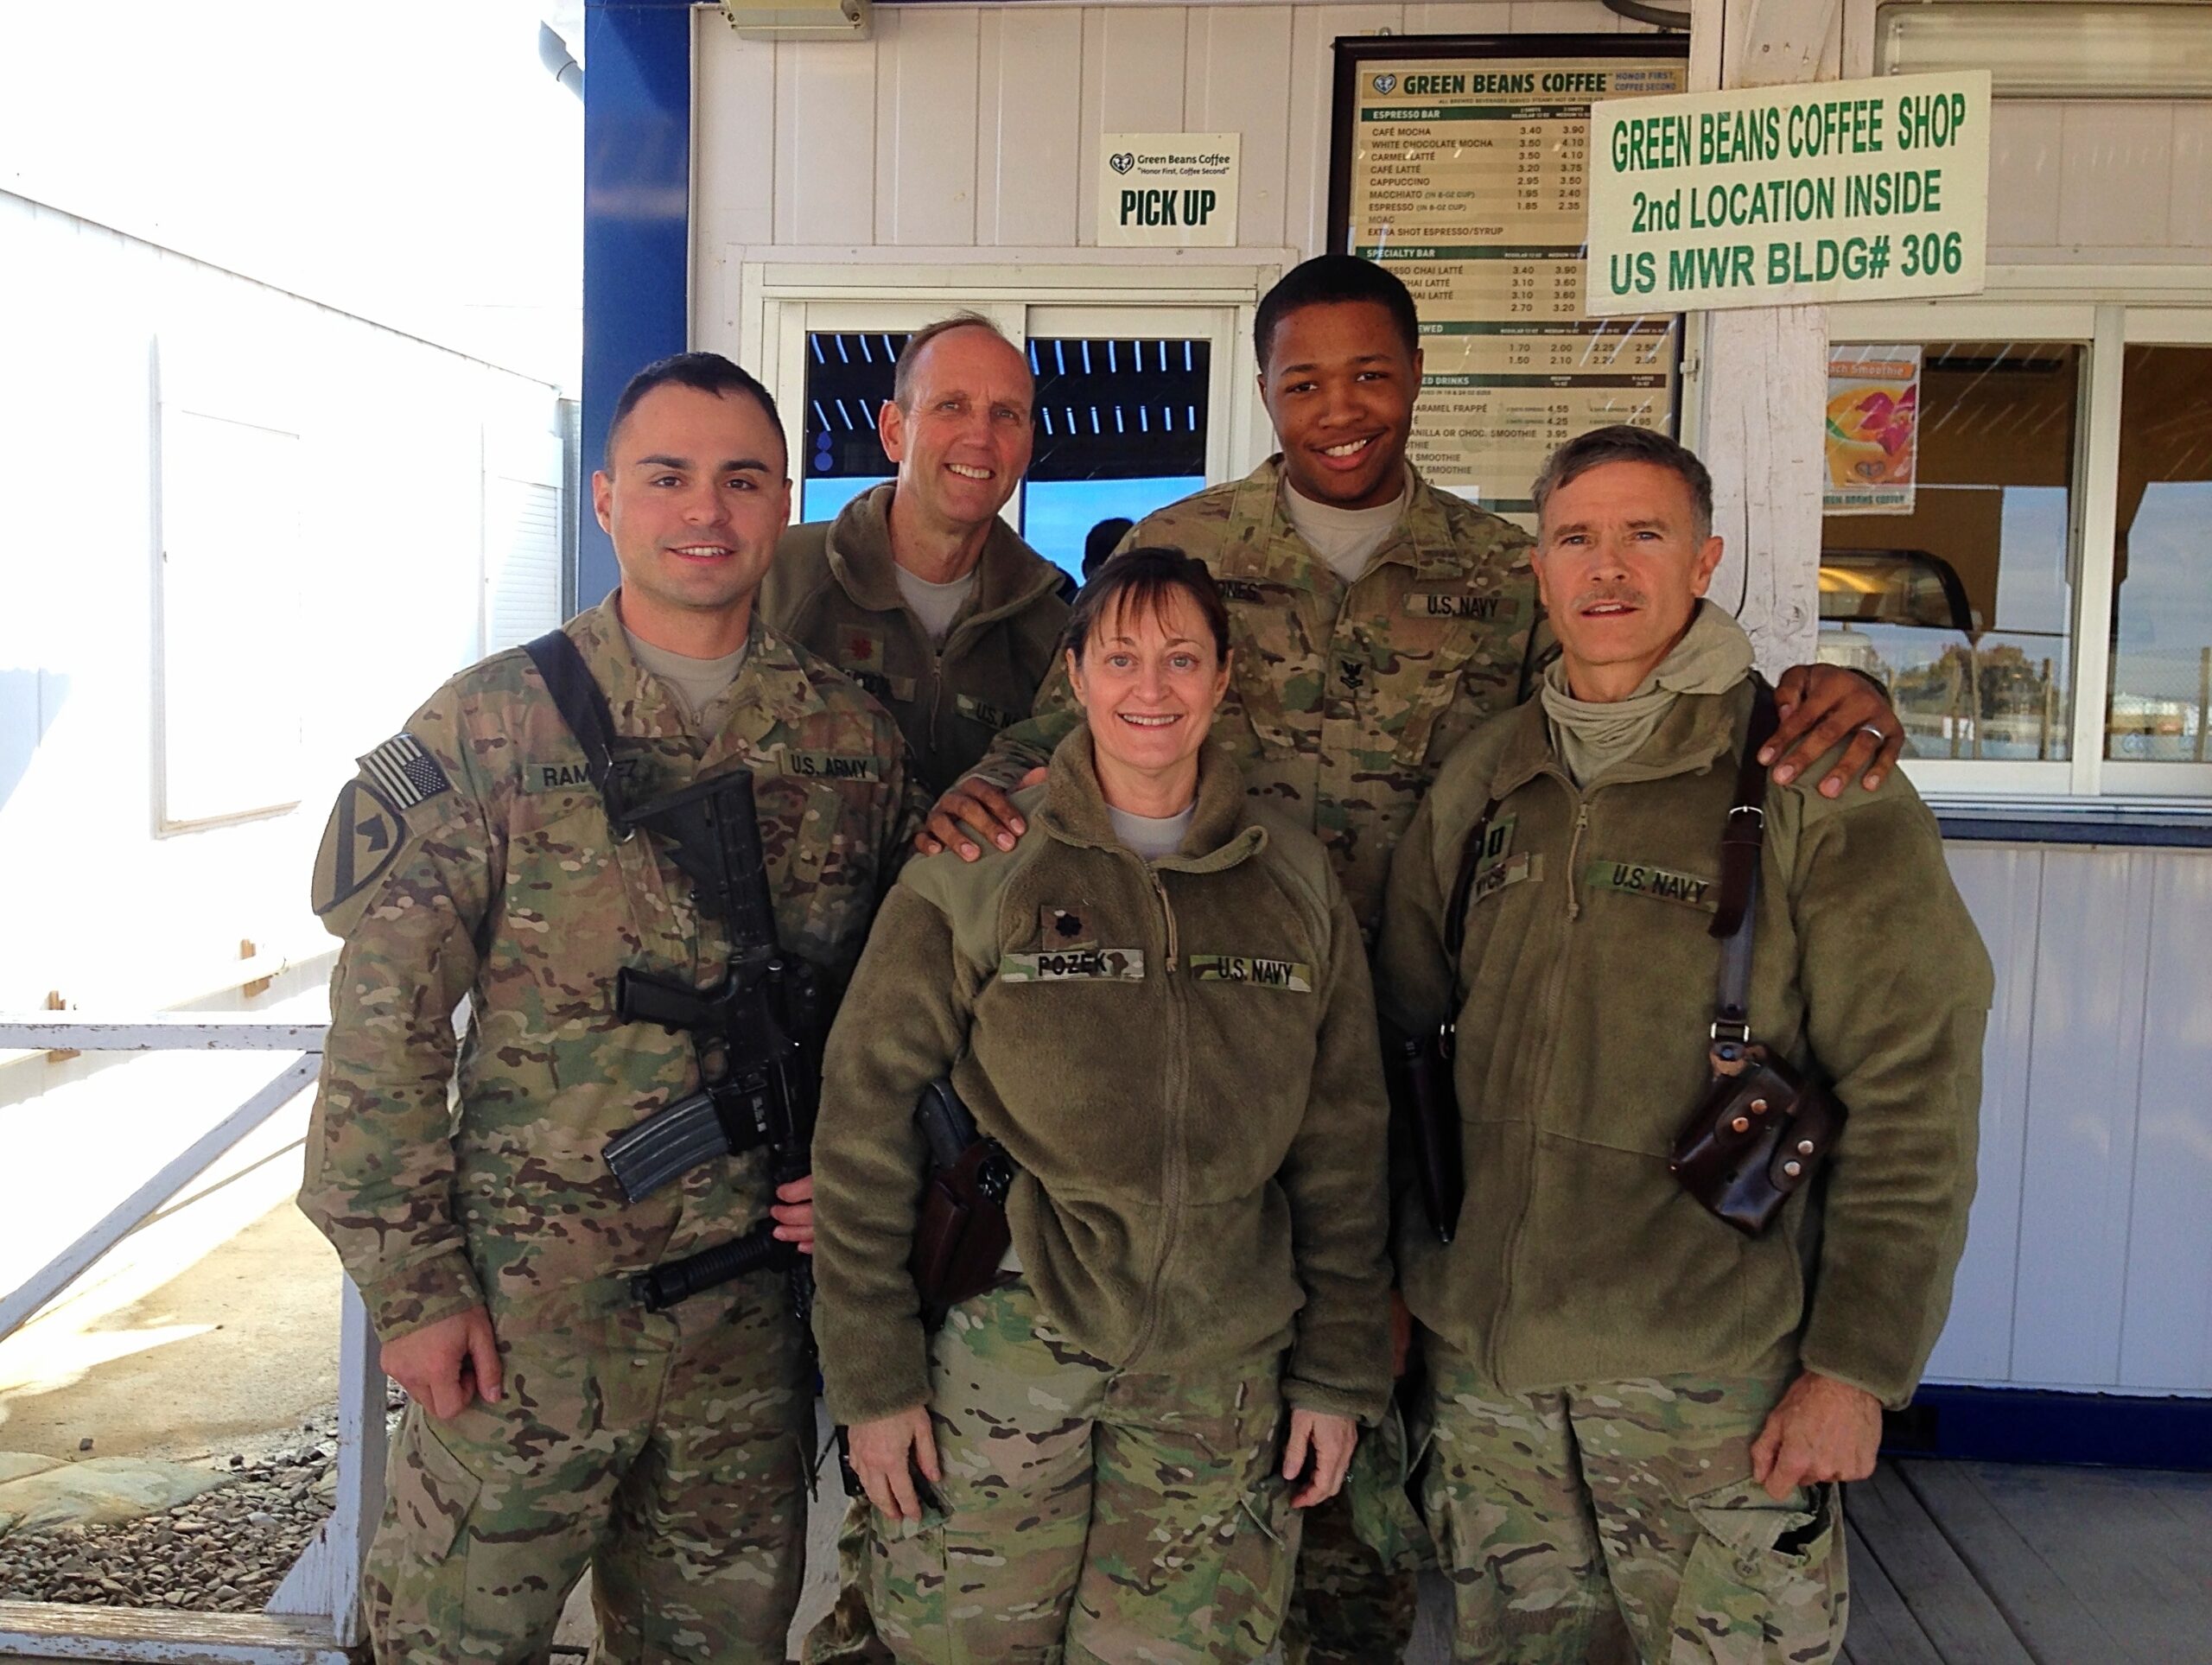 Dr. Skip with service men and women